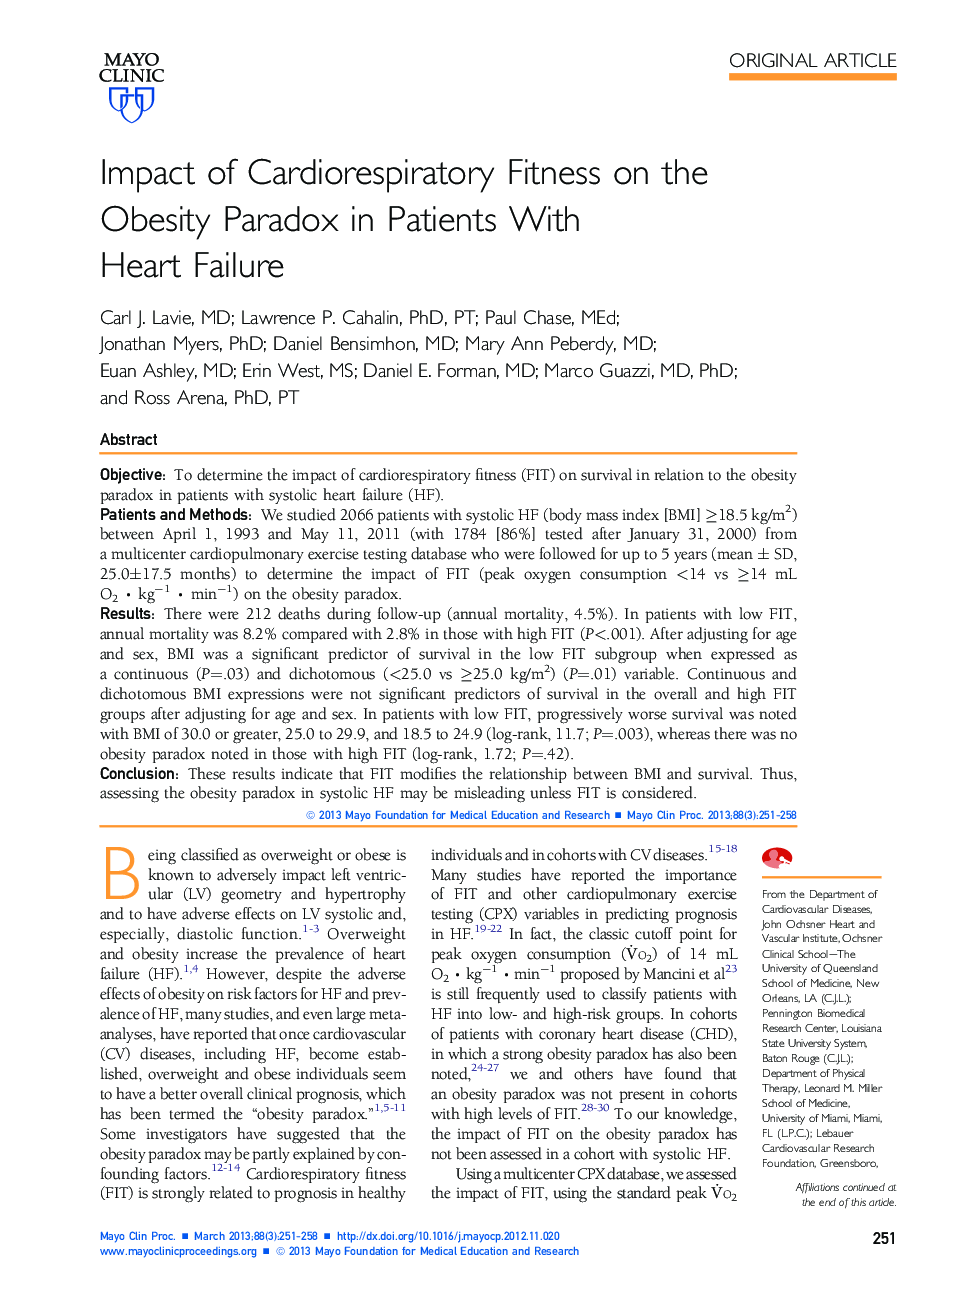 Impact of Cardiorespiratory Fitness on the Obesity Paradox in Patients With Heart Failure